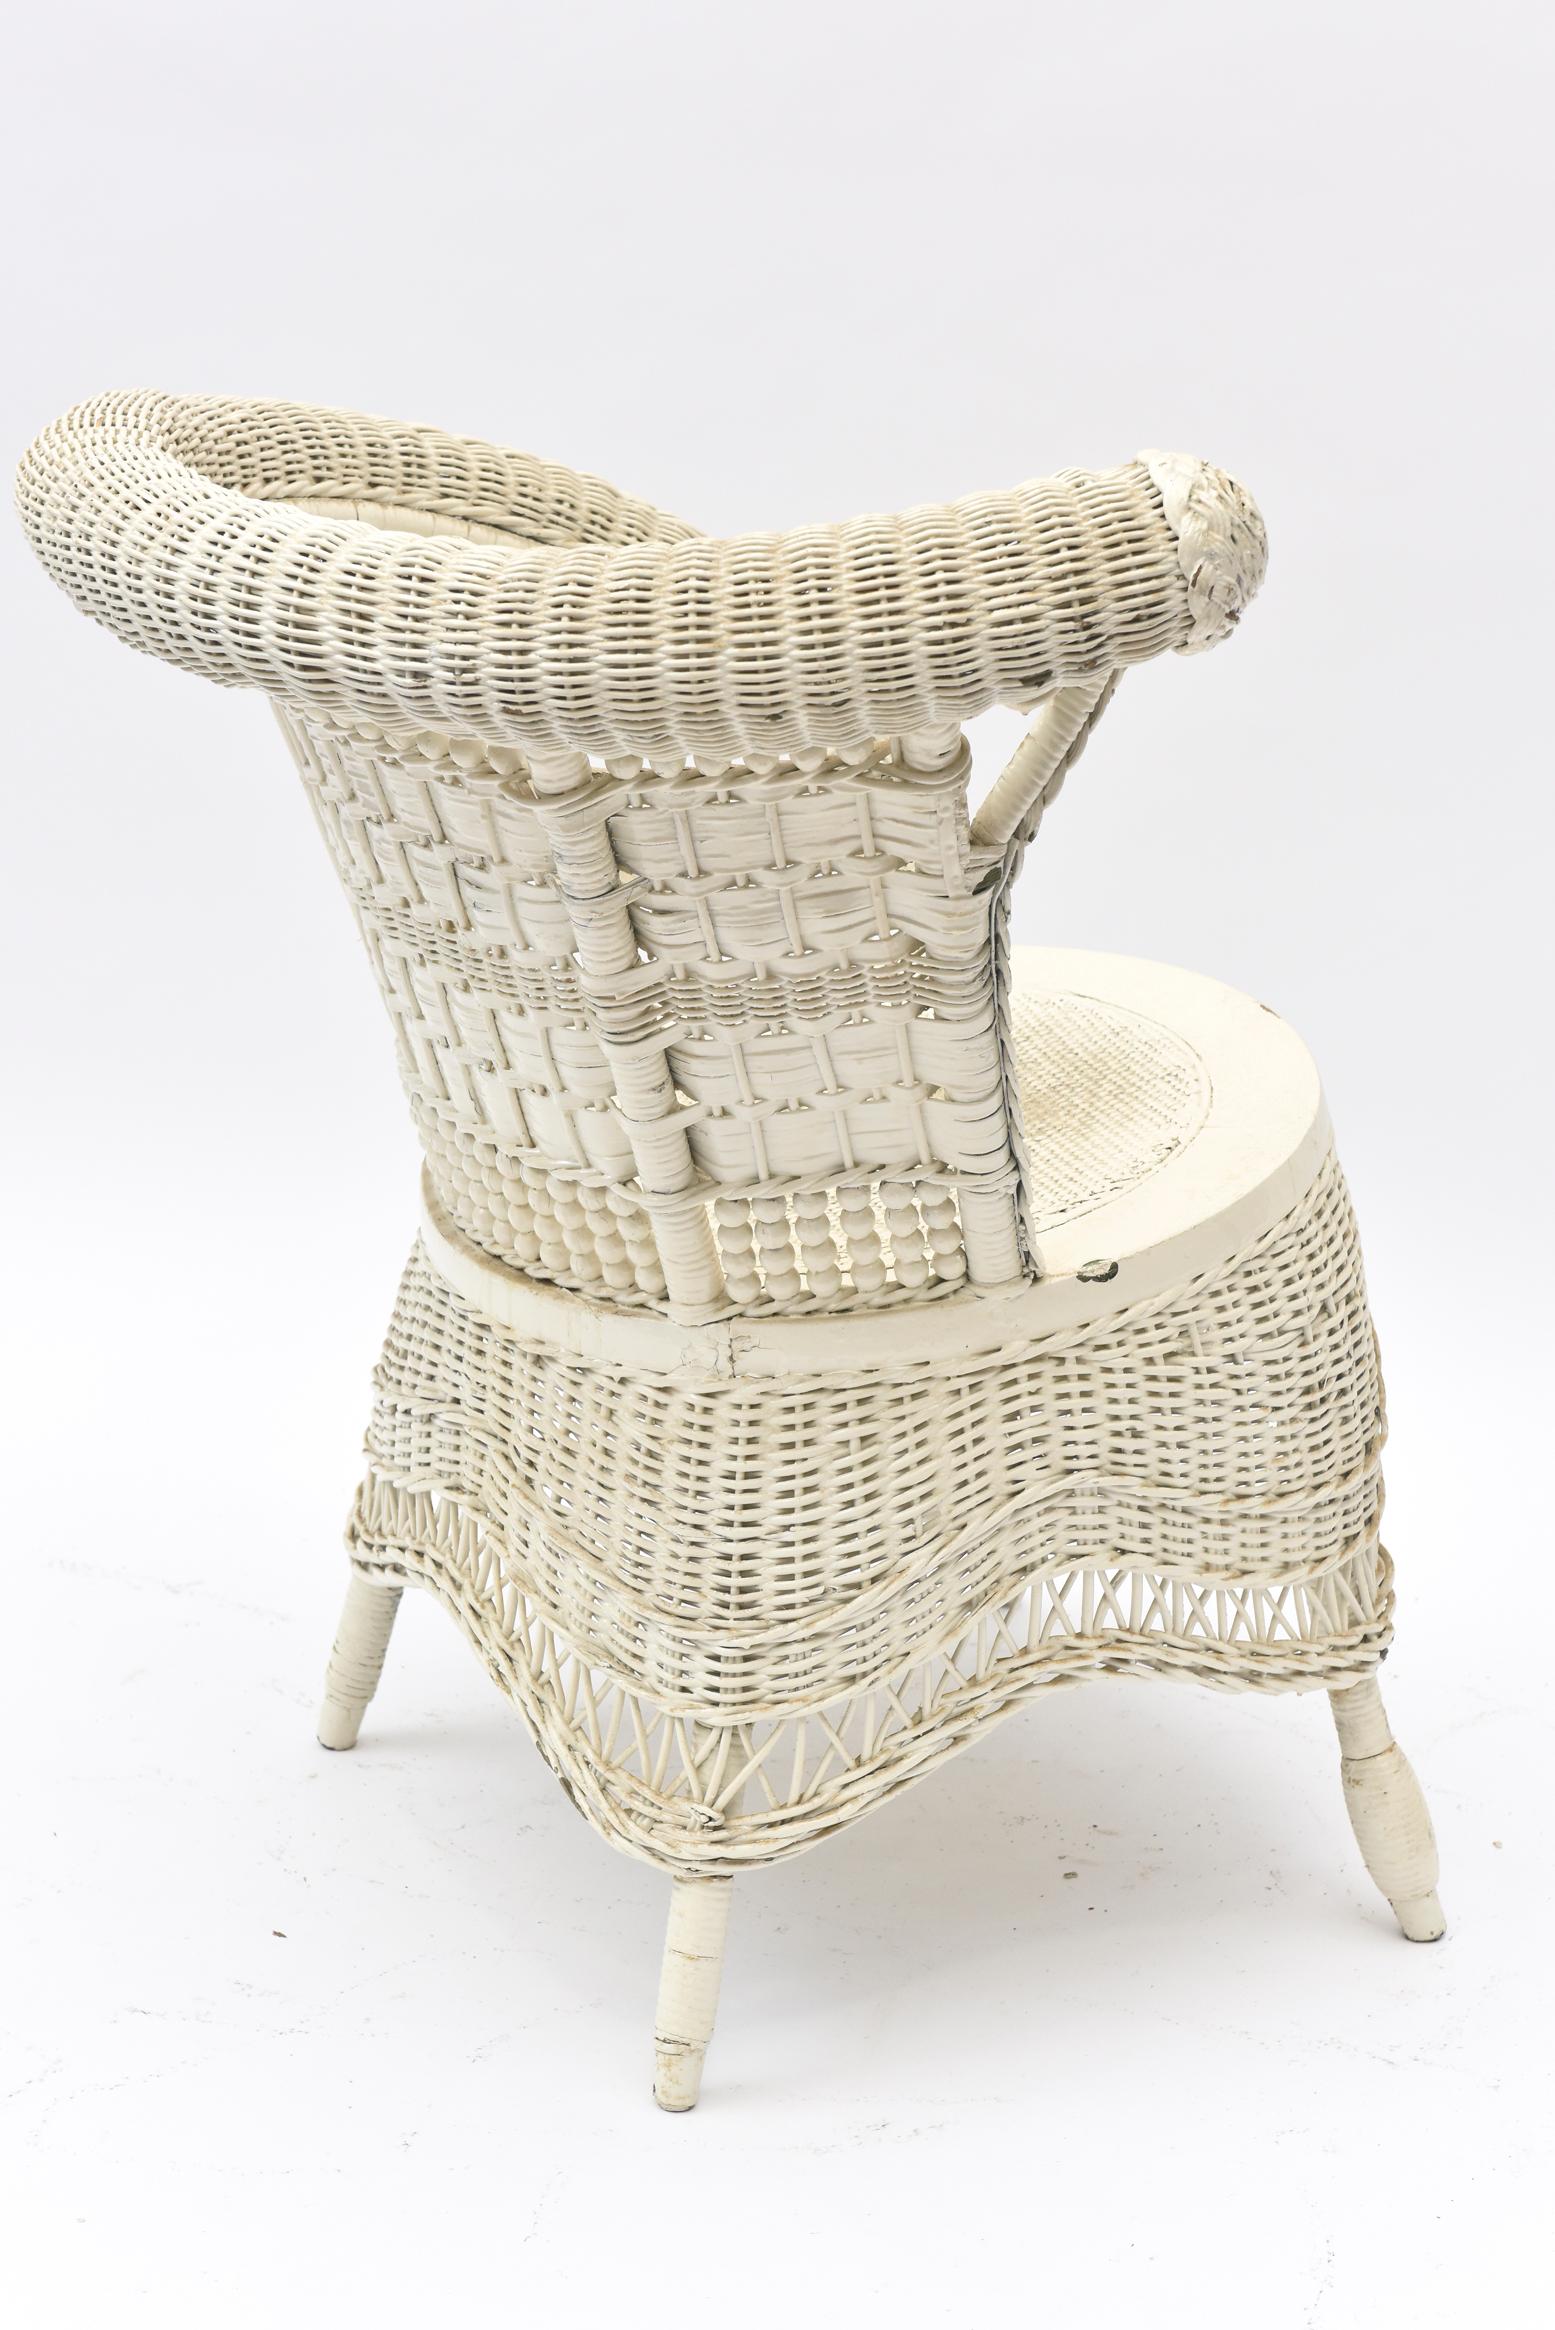 Woven Victorian Wicker Rolled Arm Portrait Chair